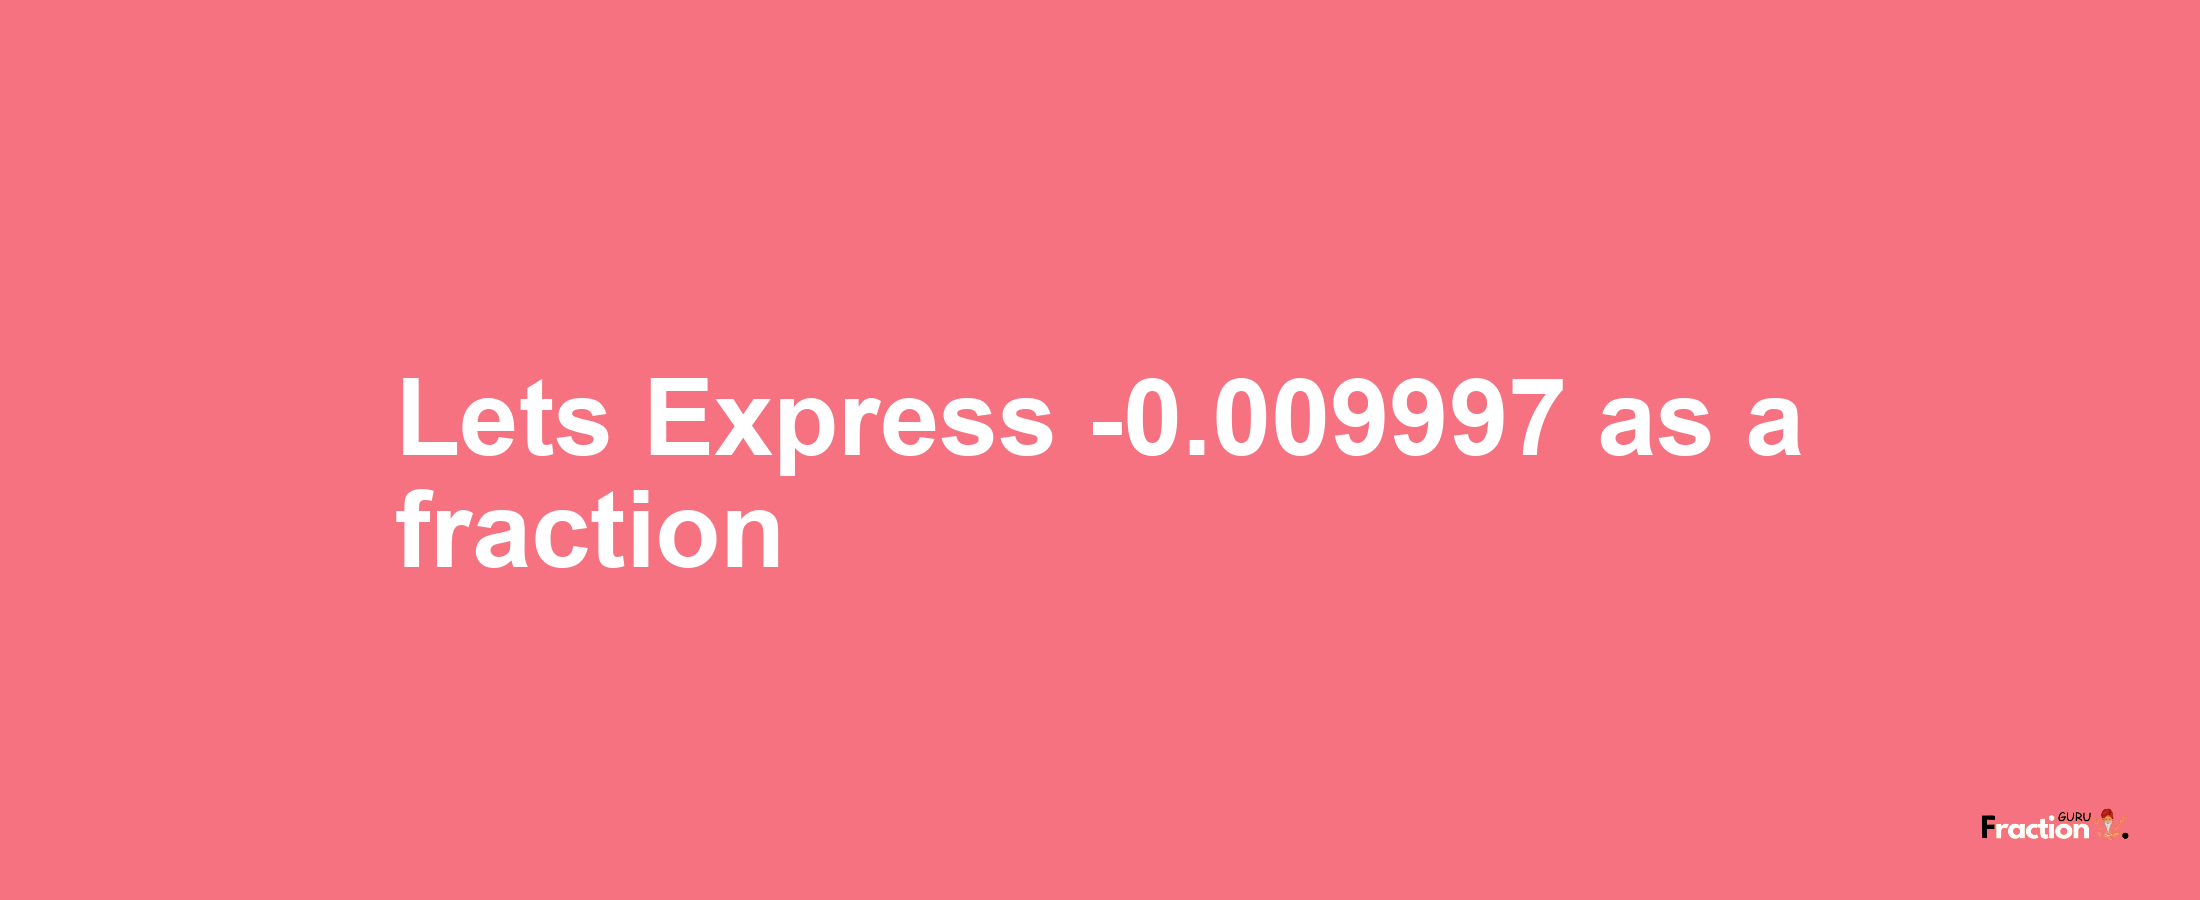 Lets Express -0.009997 as afraction